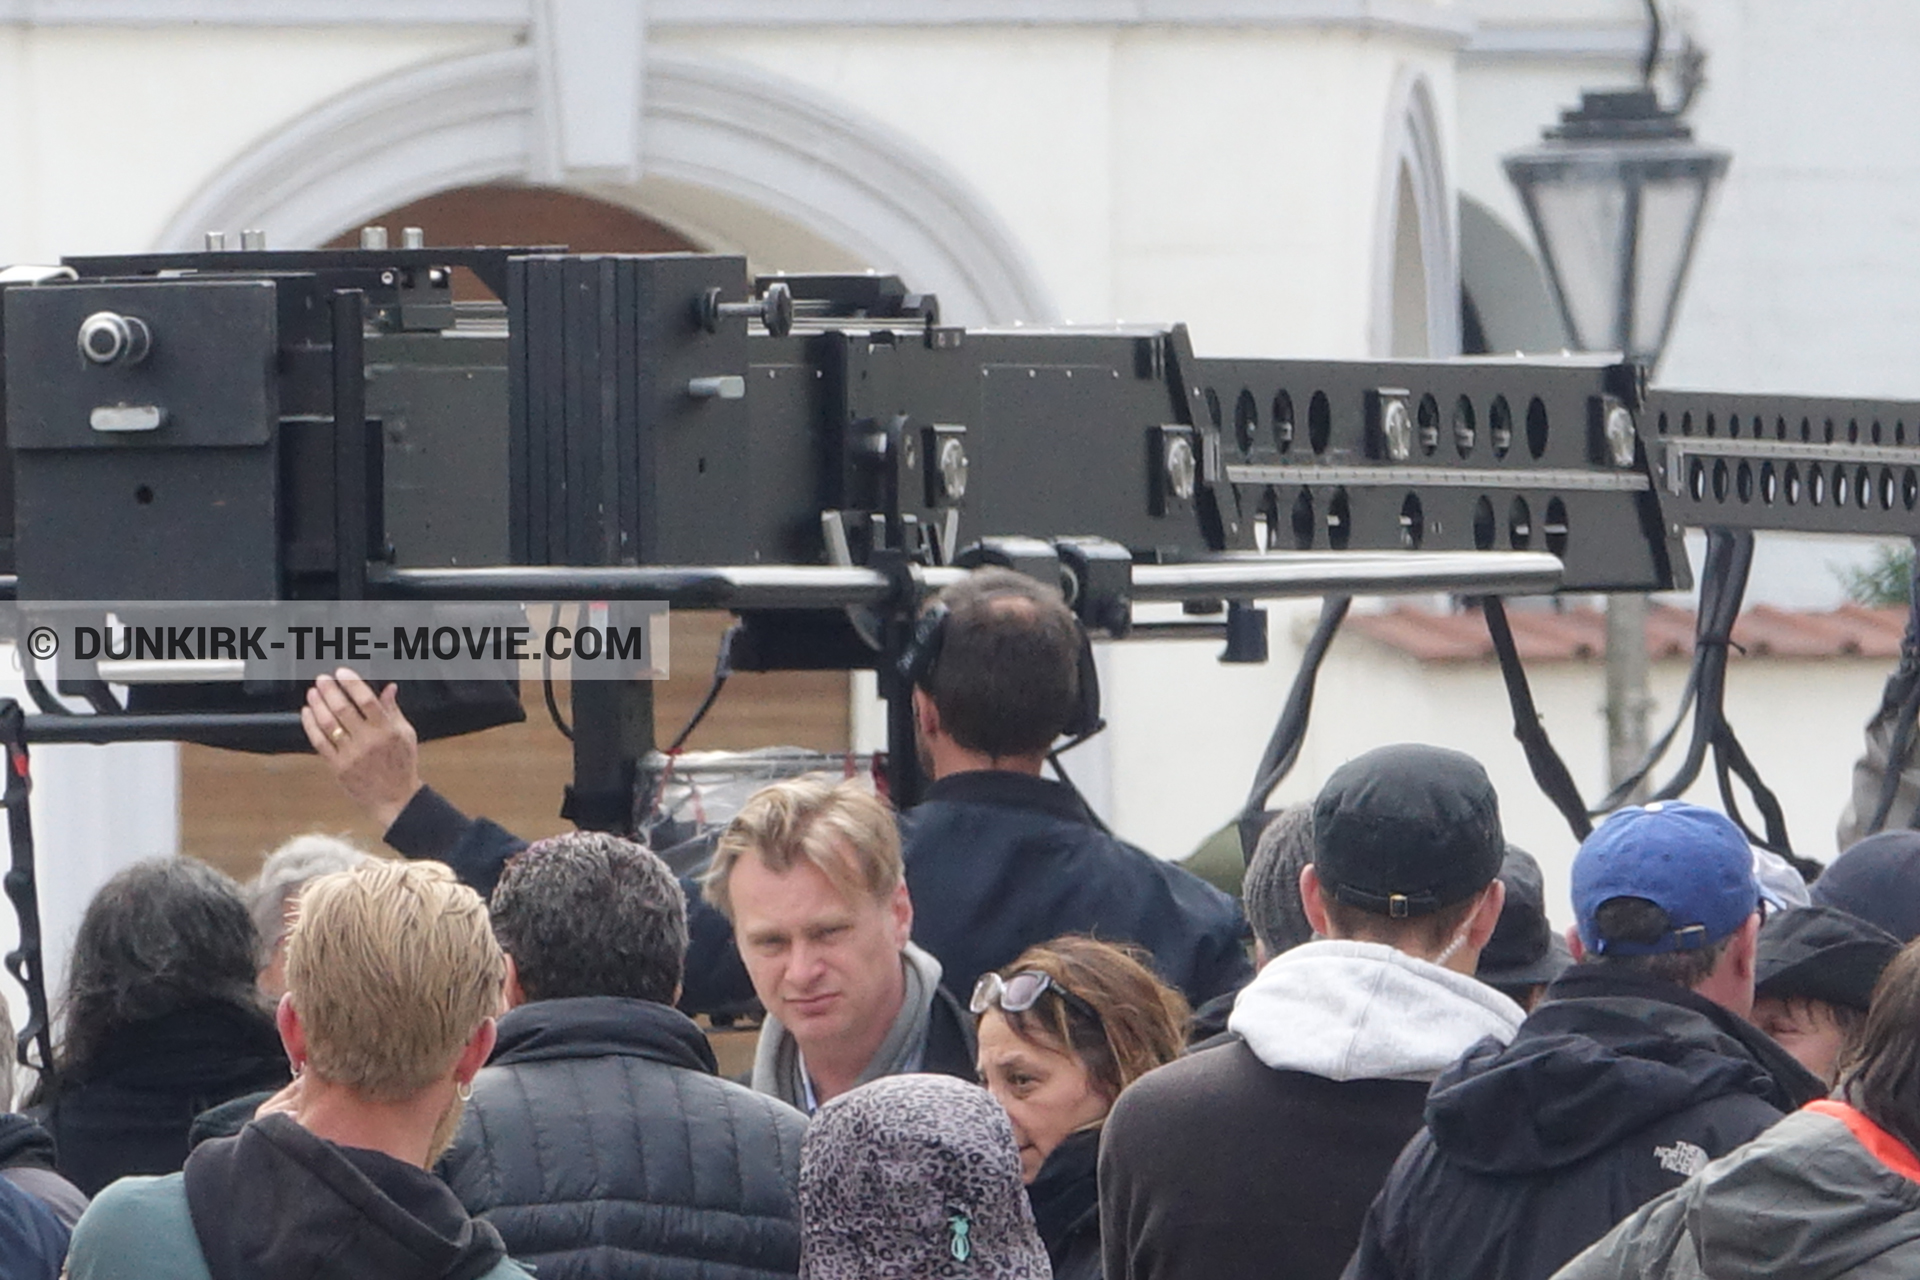 Picture with Christopher Nolan, Belle Rade street, technical team,  from behind the scene of the Dunkirk movie by Nolan